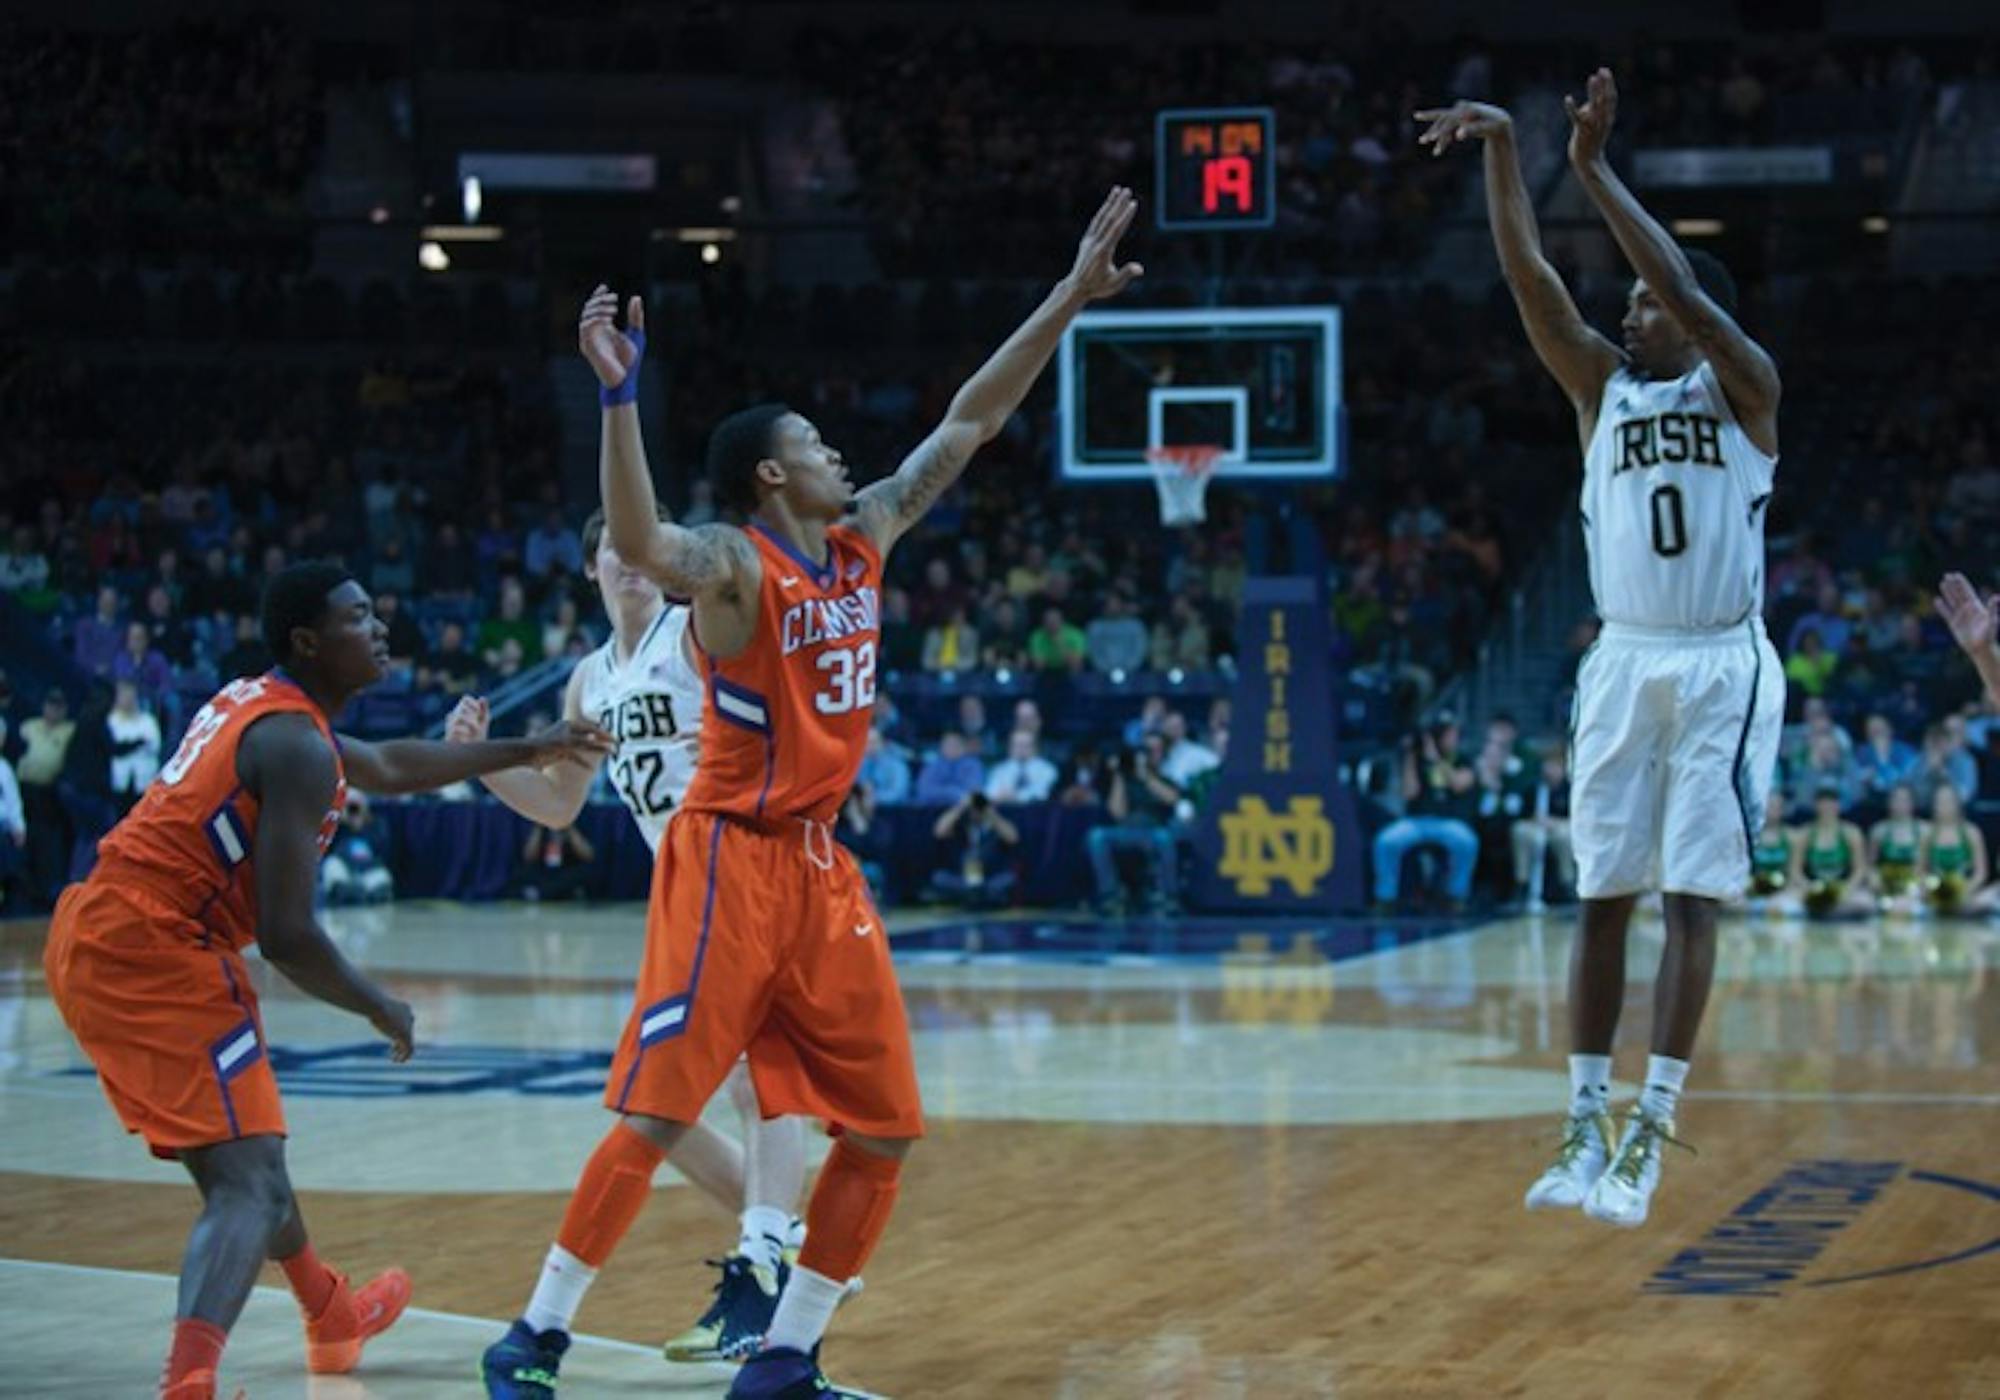 Irish senior guard Eric Atkins shoots a 3-pointer during Notre Dame’s 68-64 win over Clemson in double overtime Feb. 11. Notre Dame returns to Purcell Pavilion tonight at 7 p.m. against Georgia Tech.